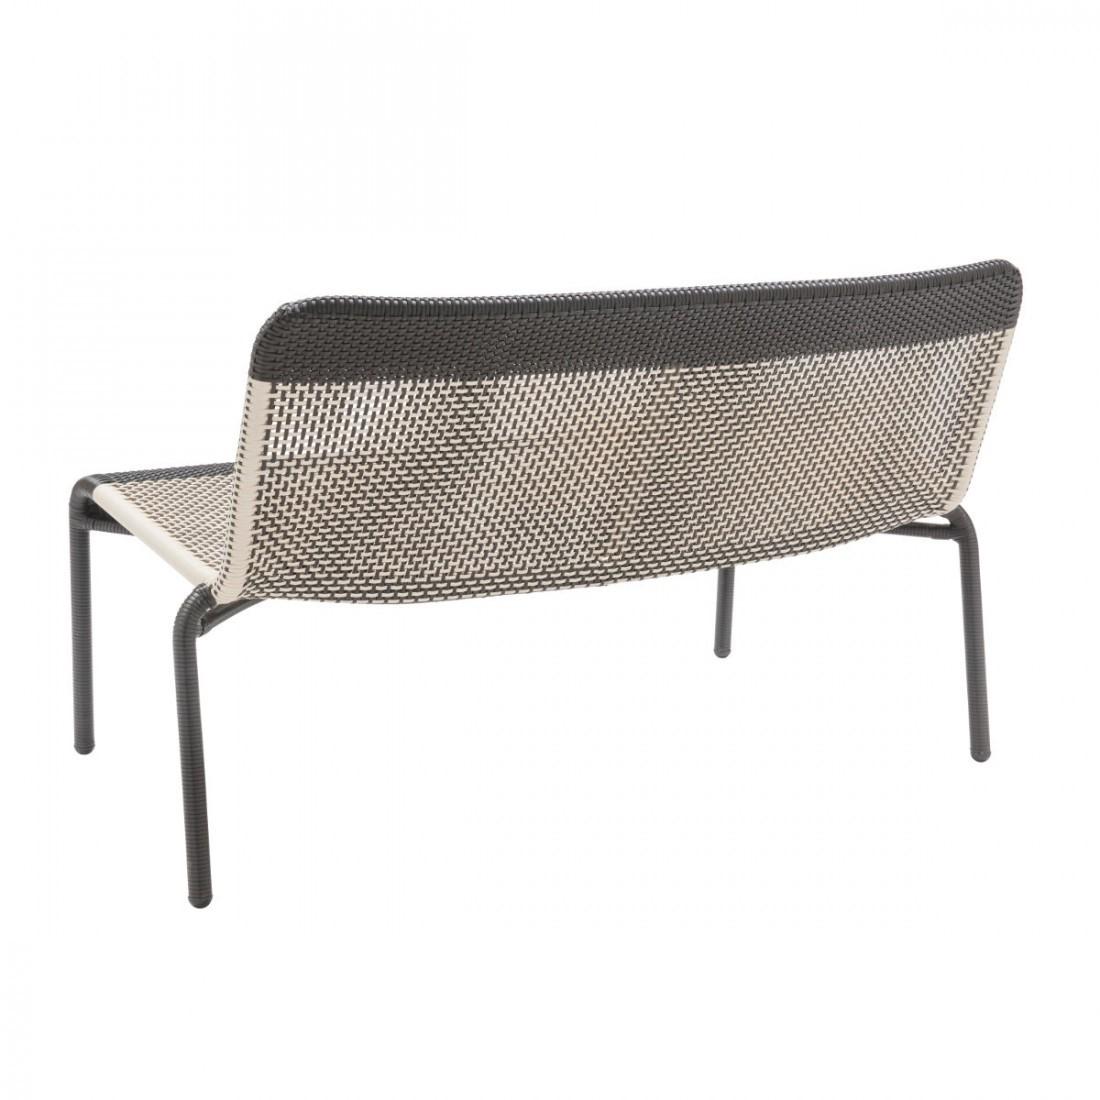 Mid-Century Modern Black and White Braided Resin French Design Outdoor Sofa